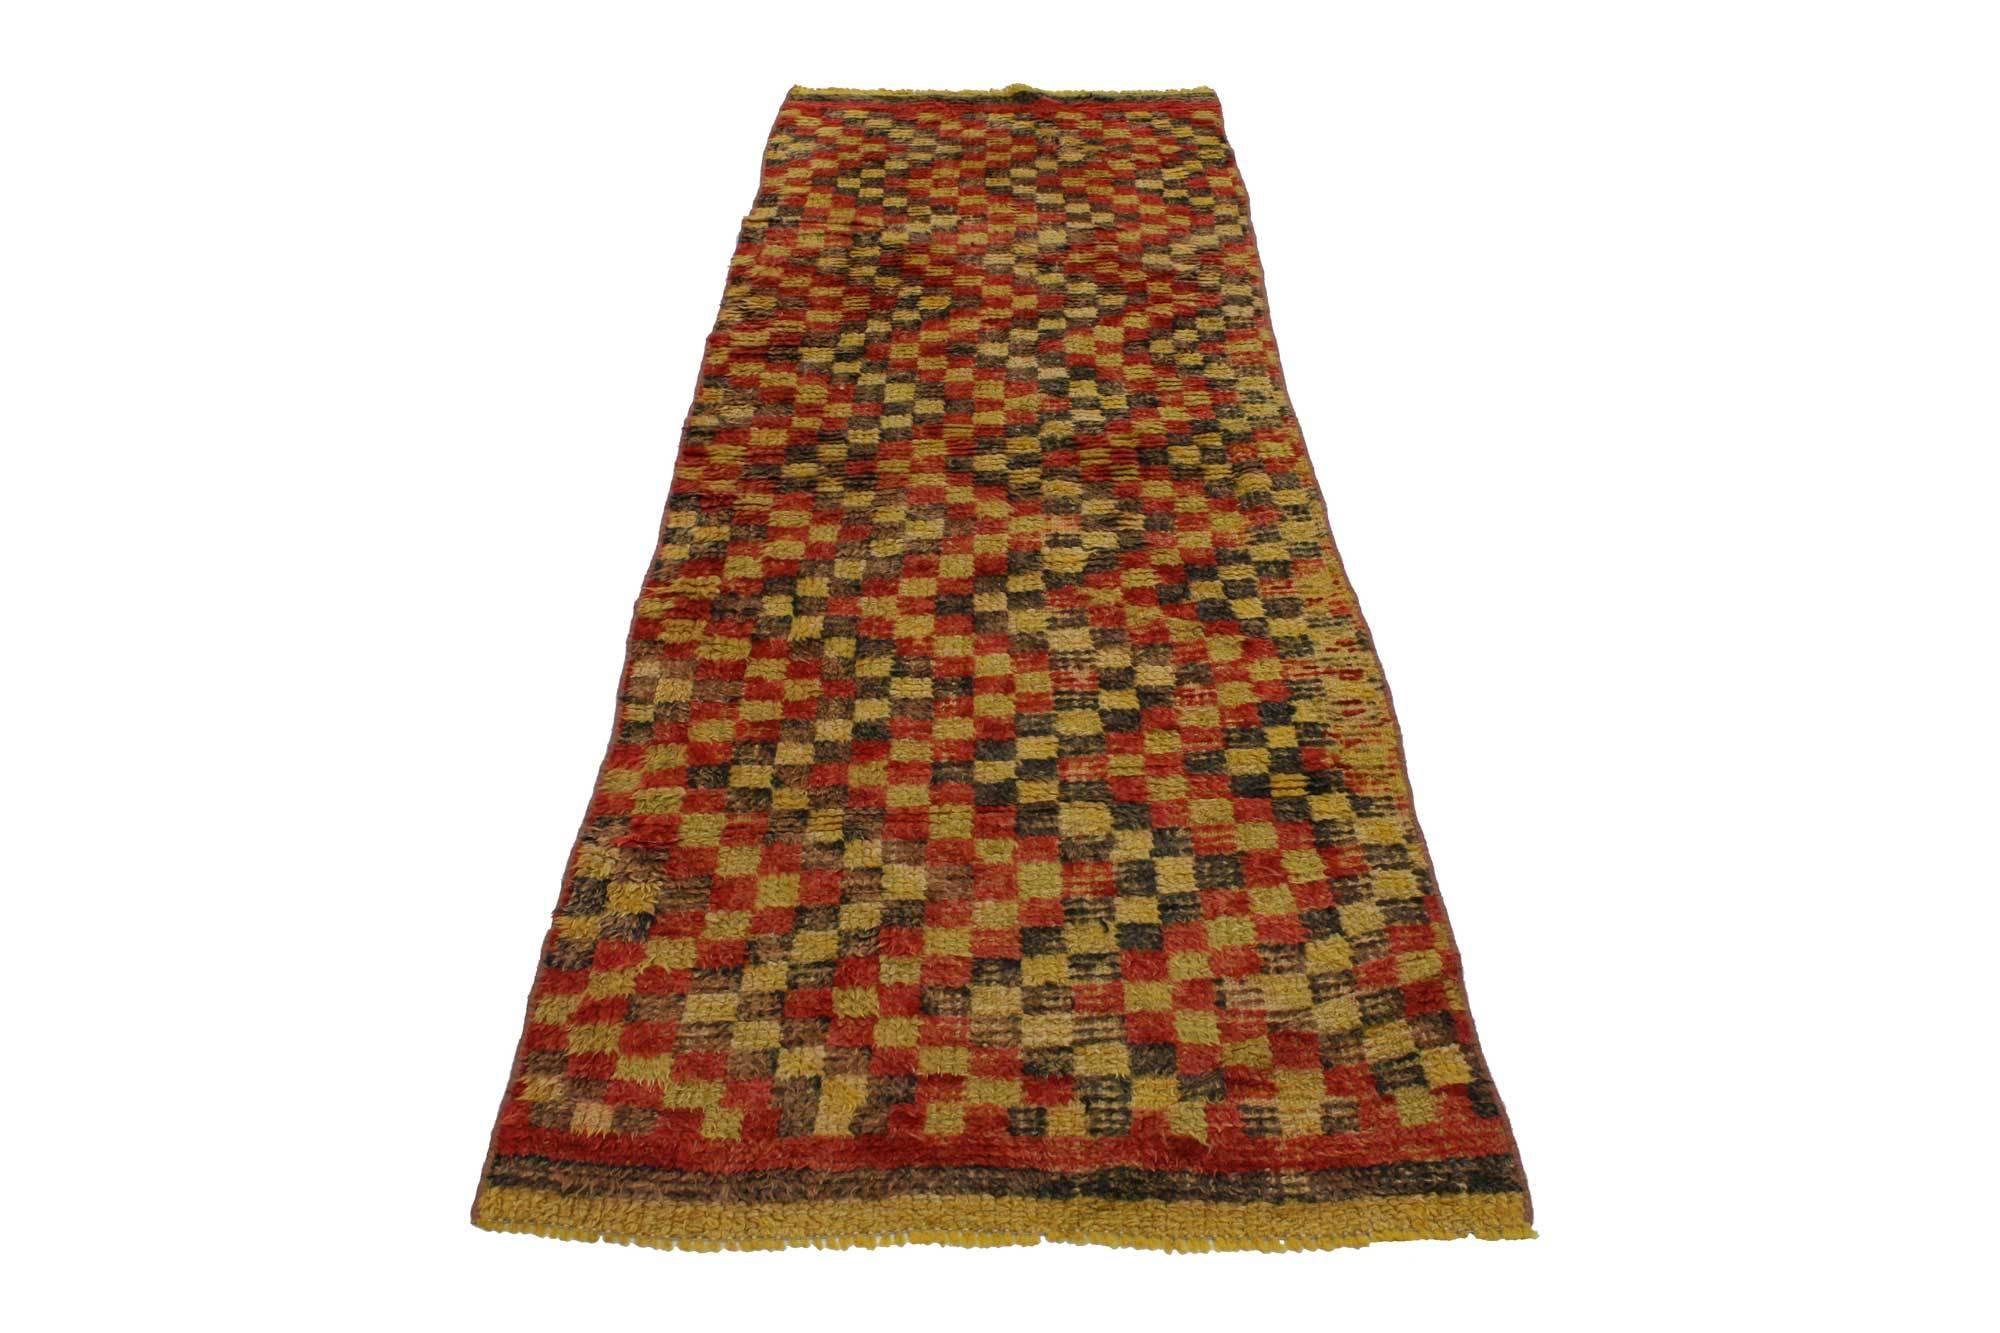 51682, Mid-Century Modern style vintage Turkish Oushak runner. Exciting and dynamic, this Mid-Century Modern style vintage Turkish Oushak runner features a zigzag checkerboard design extending the length of the rug. Versatile with brilliant earth